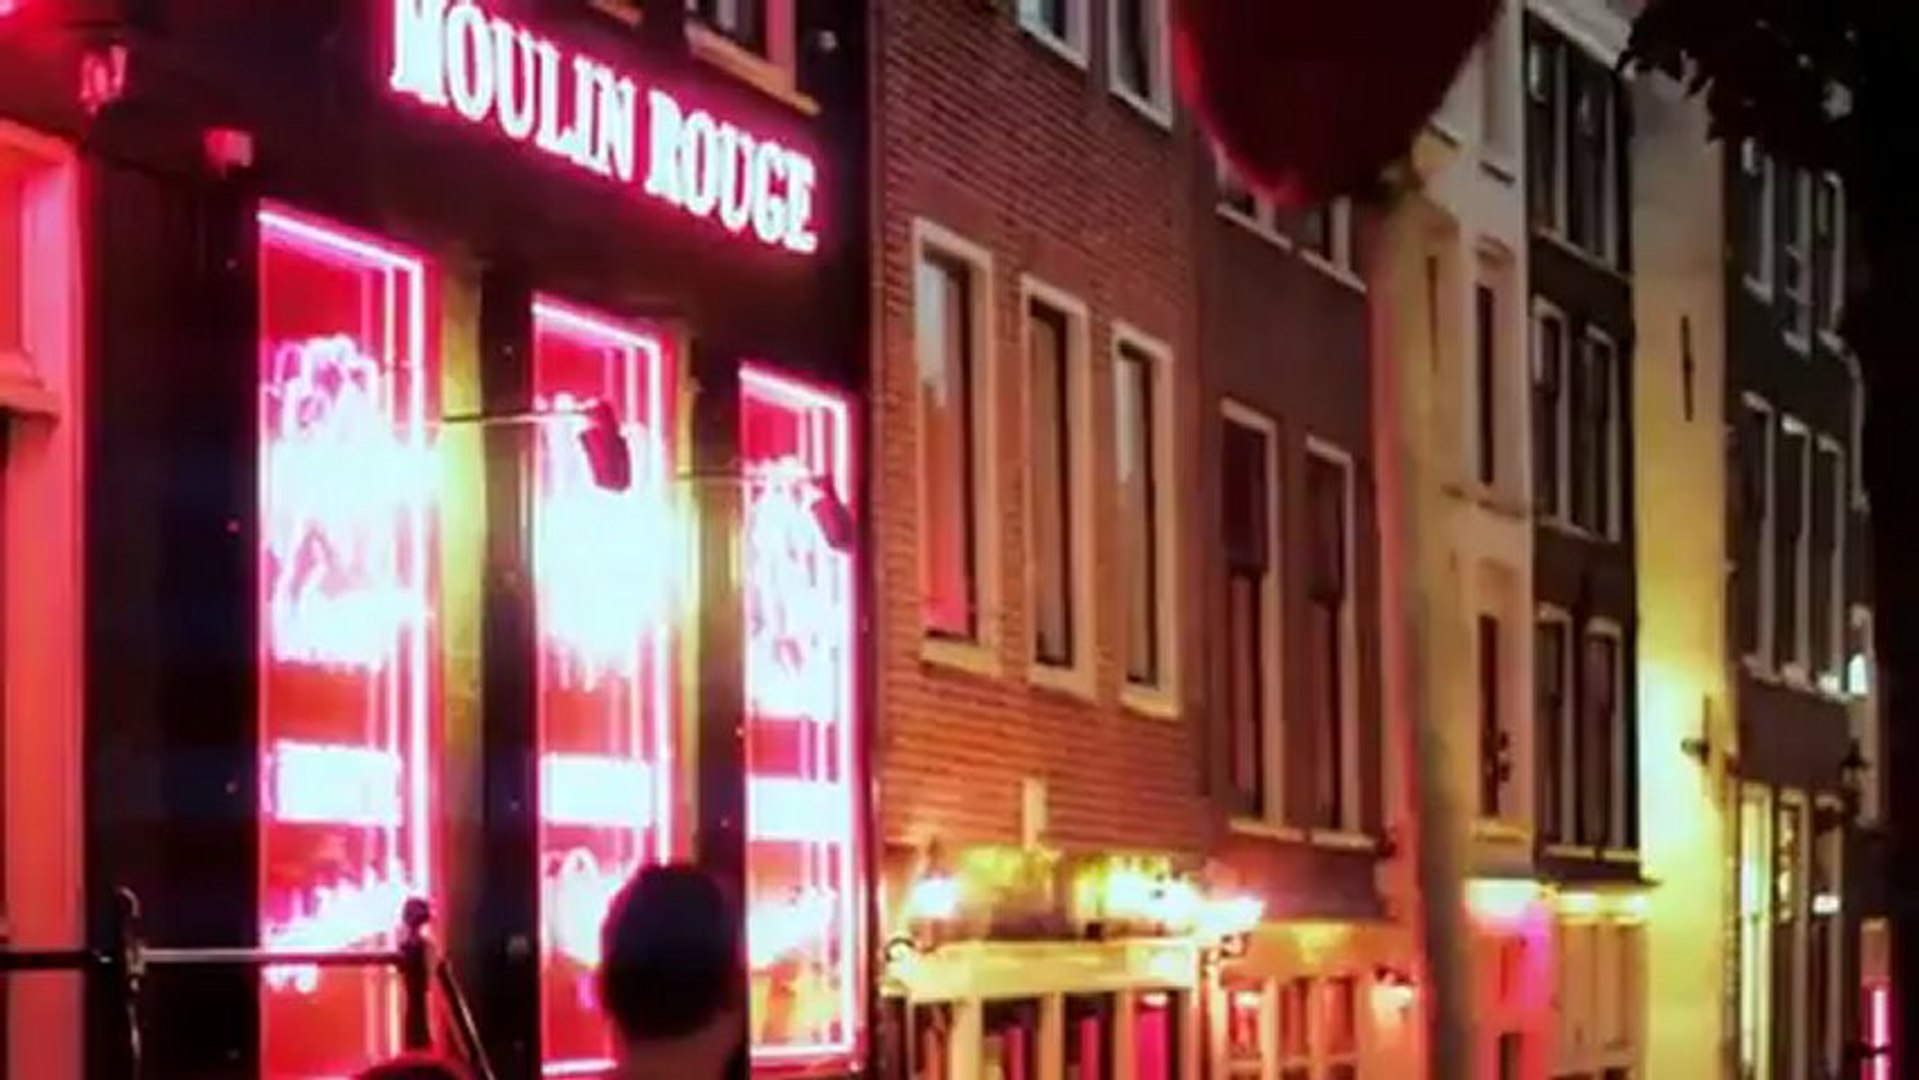 Red Light District Zwolle